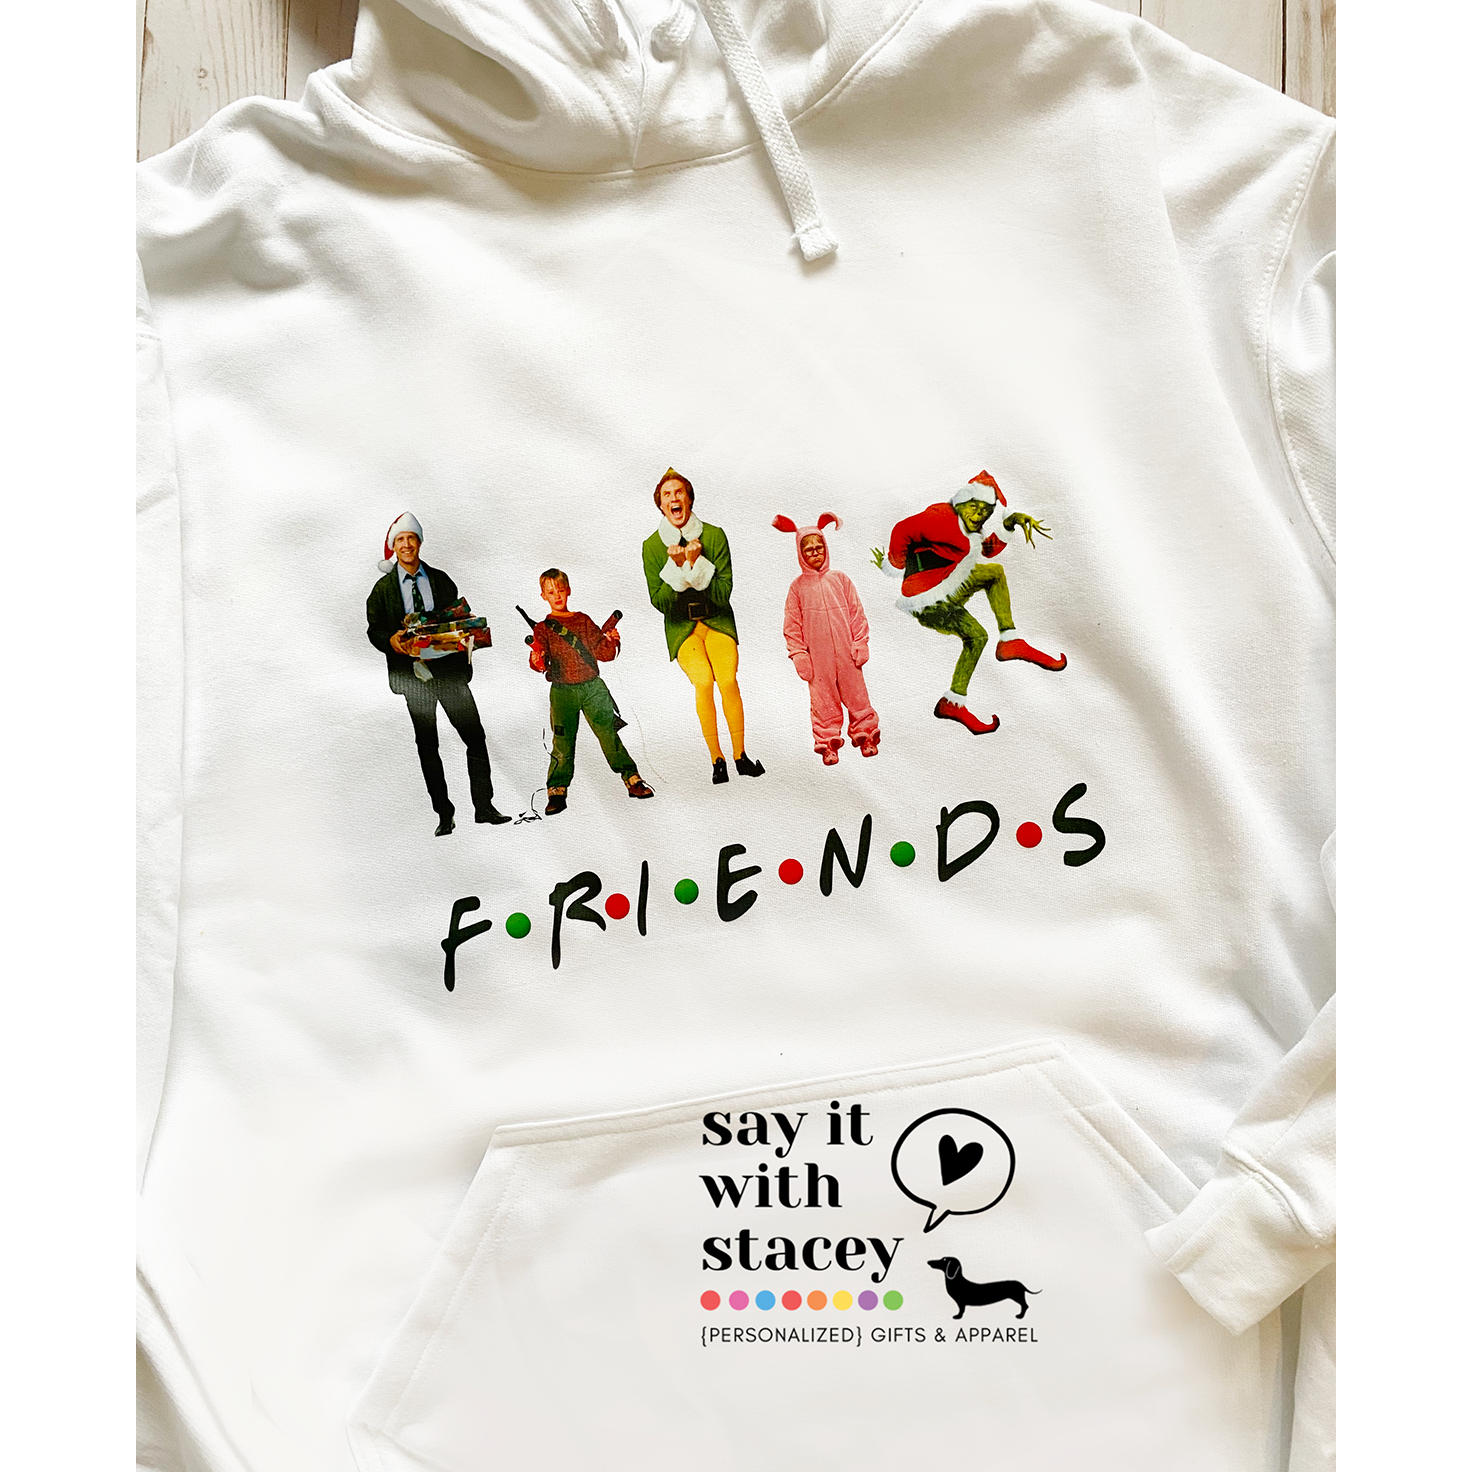 FRIENDS HOODIE or CREW NECK White only